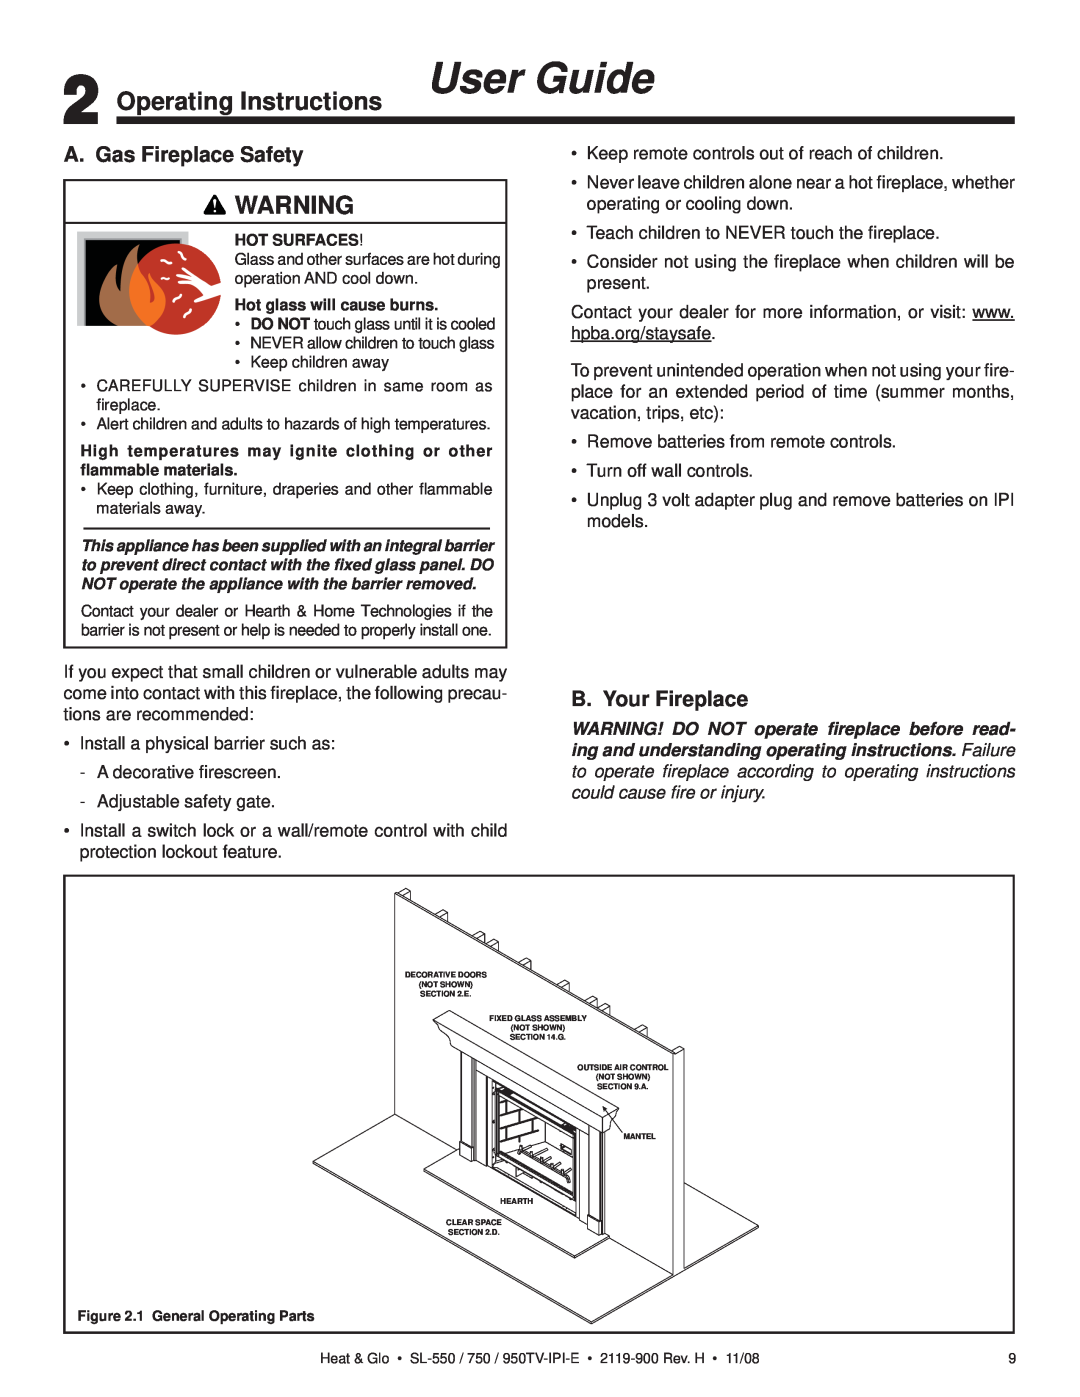 Hearth and Home Technologies SL-750TV-IPI-E Operating Instructions User Guide, A. Gas Fireplace Safety, B. Your Fireplace 